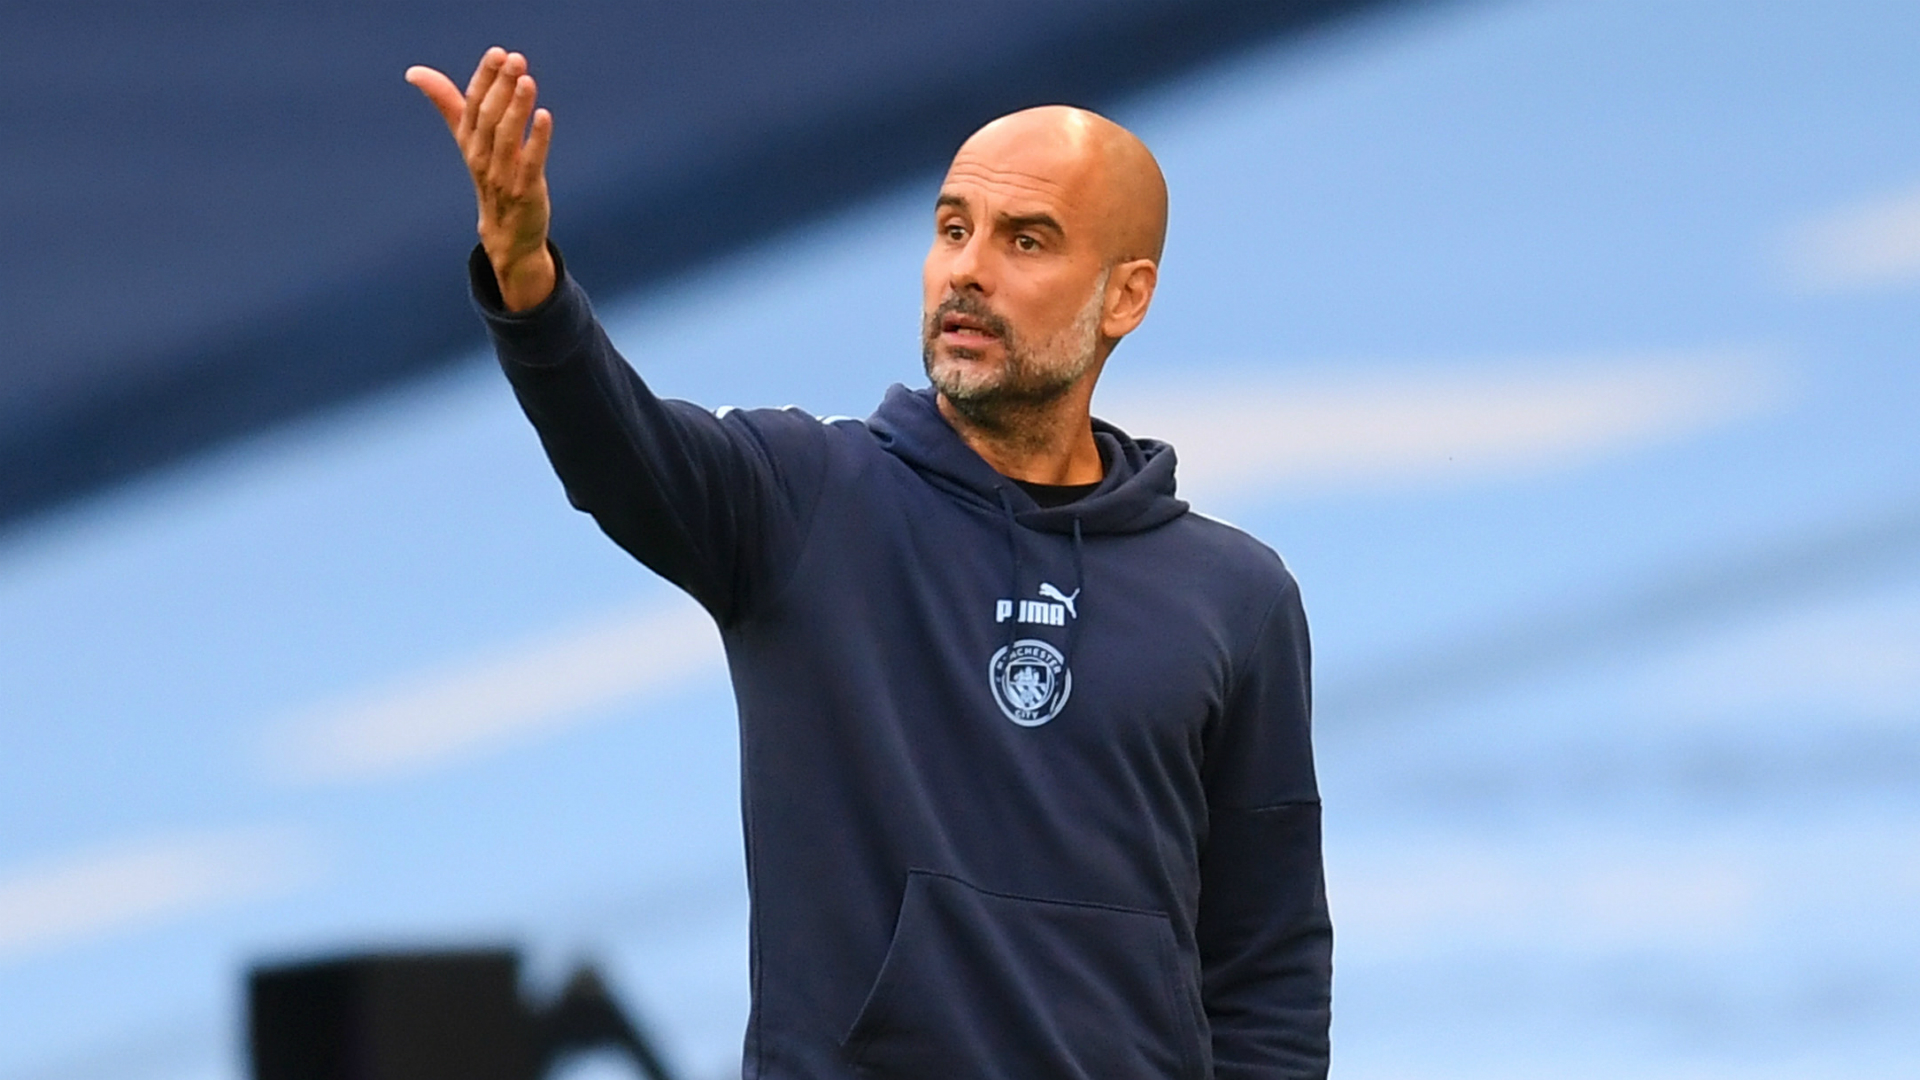 Manchester City manager Pep Guardiola hit out at "whispering" Premier League rivals after CAS quashed their Champions League ban.